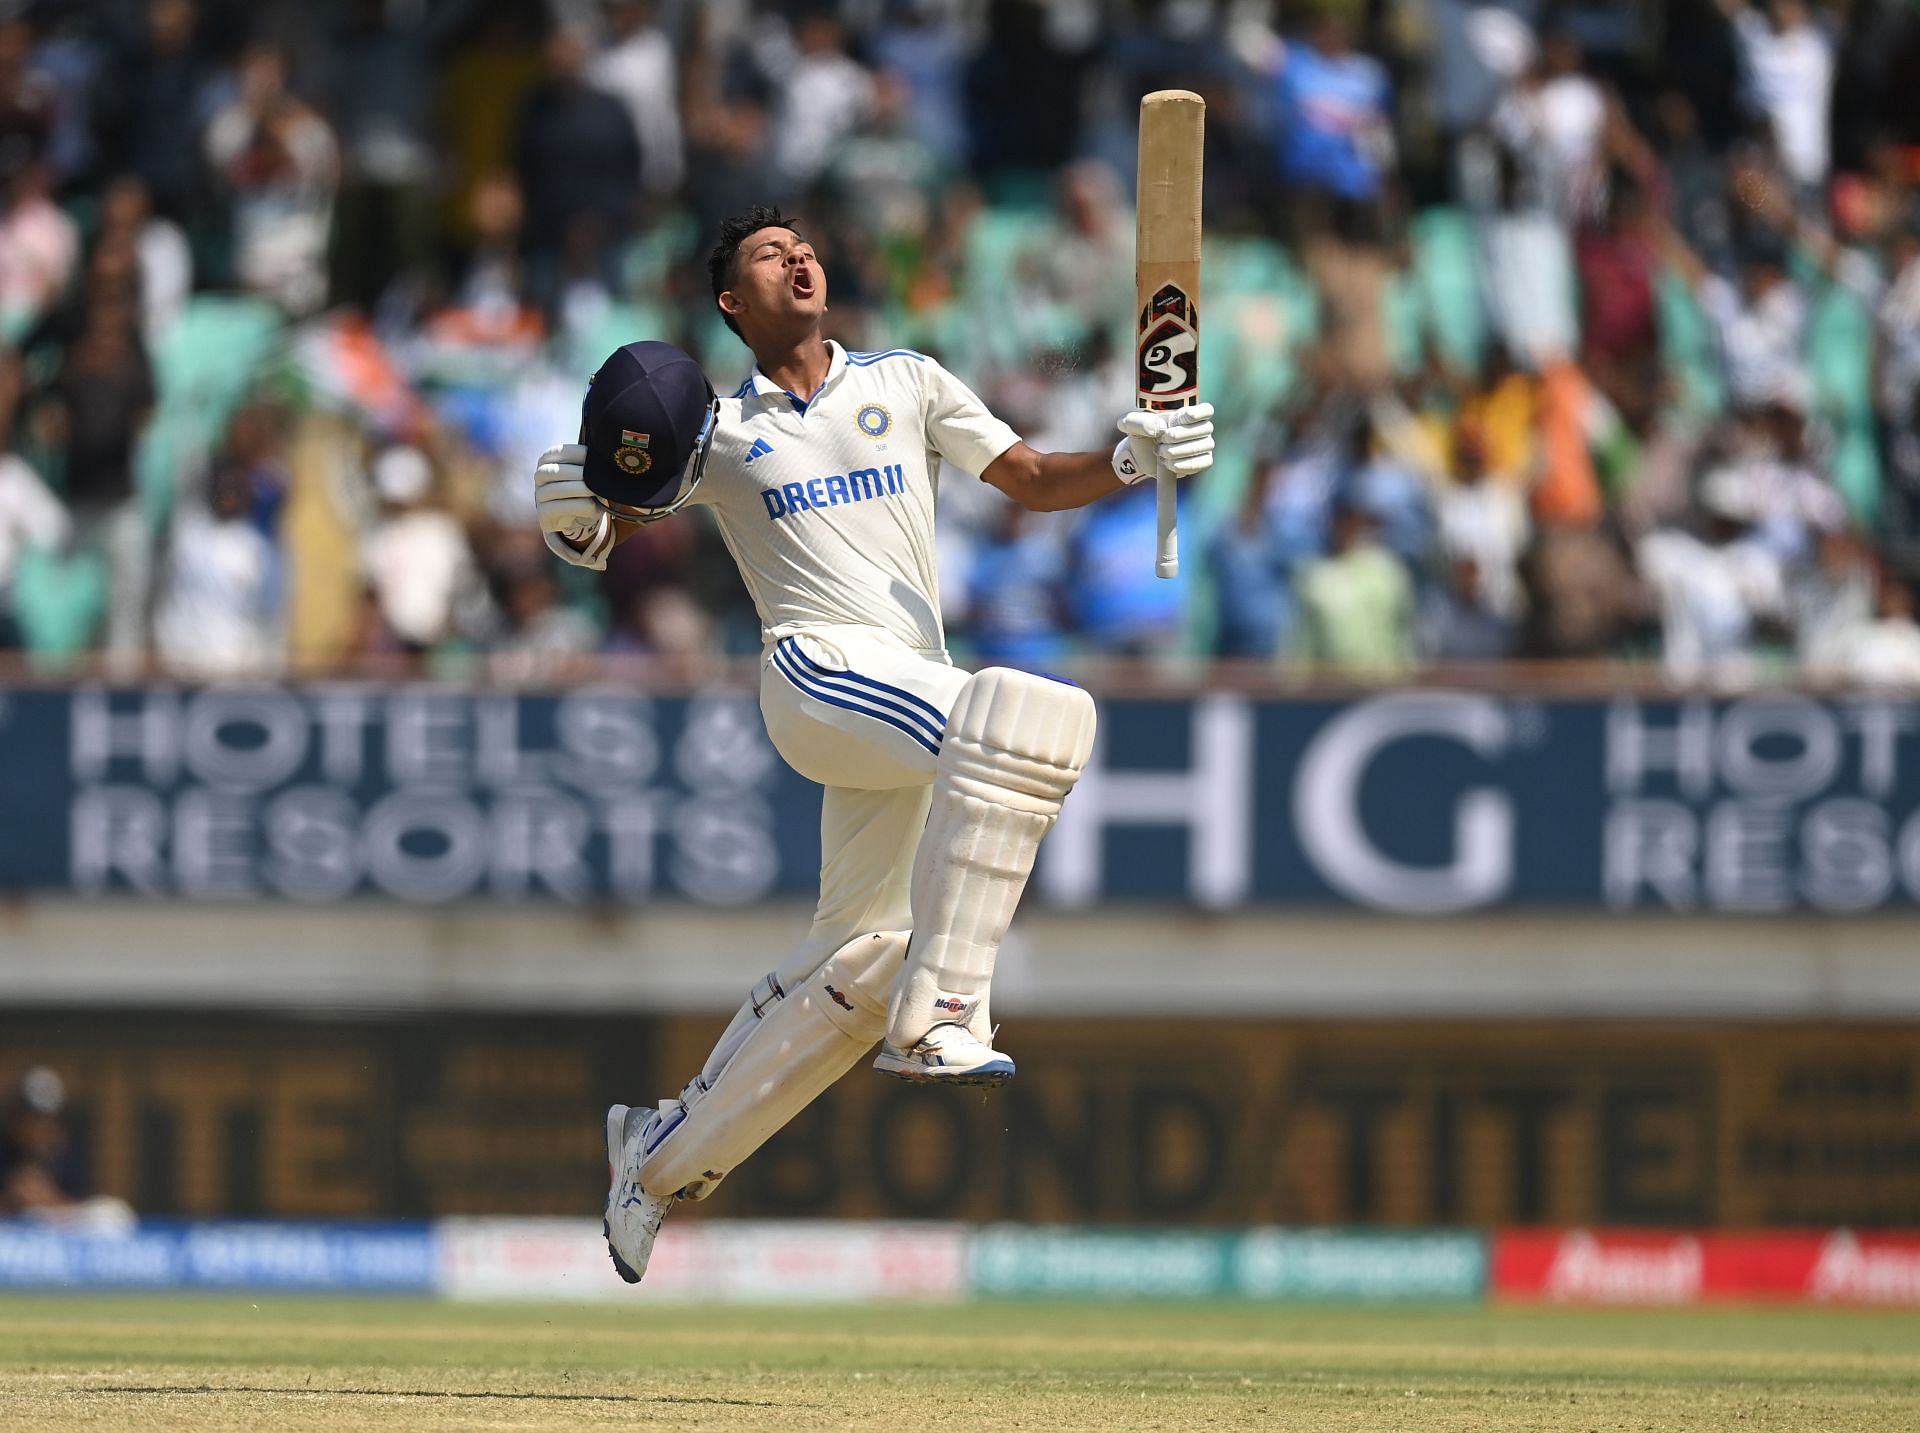 Yashasvi smashed a brilliant double-ton in the third Test. (Image Courtesy: Getty)